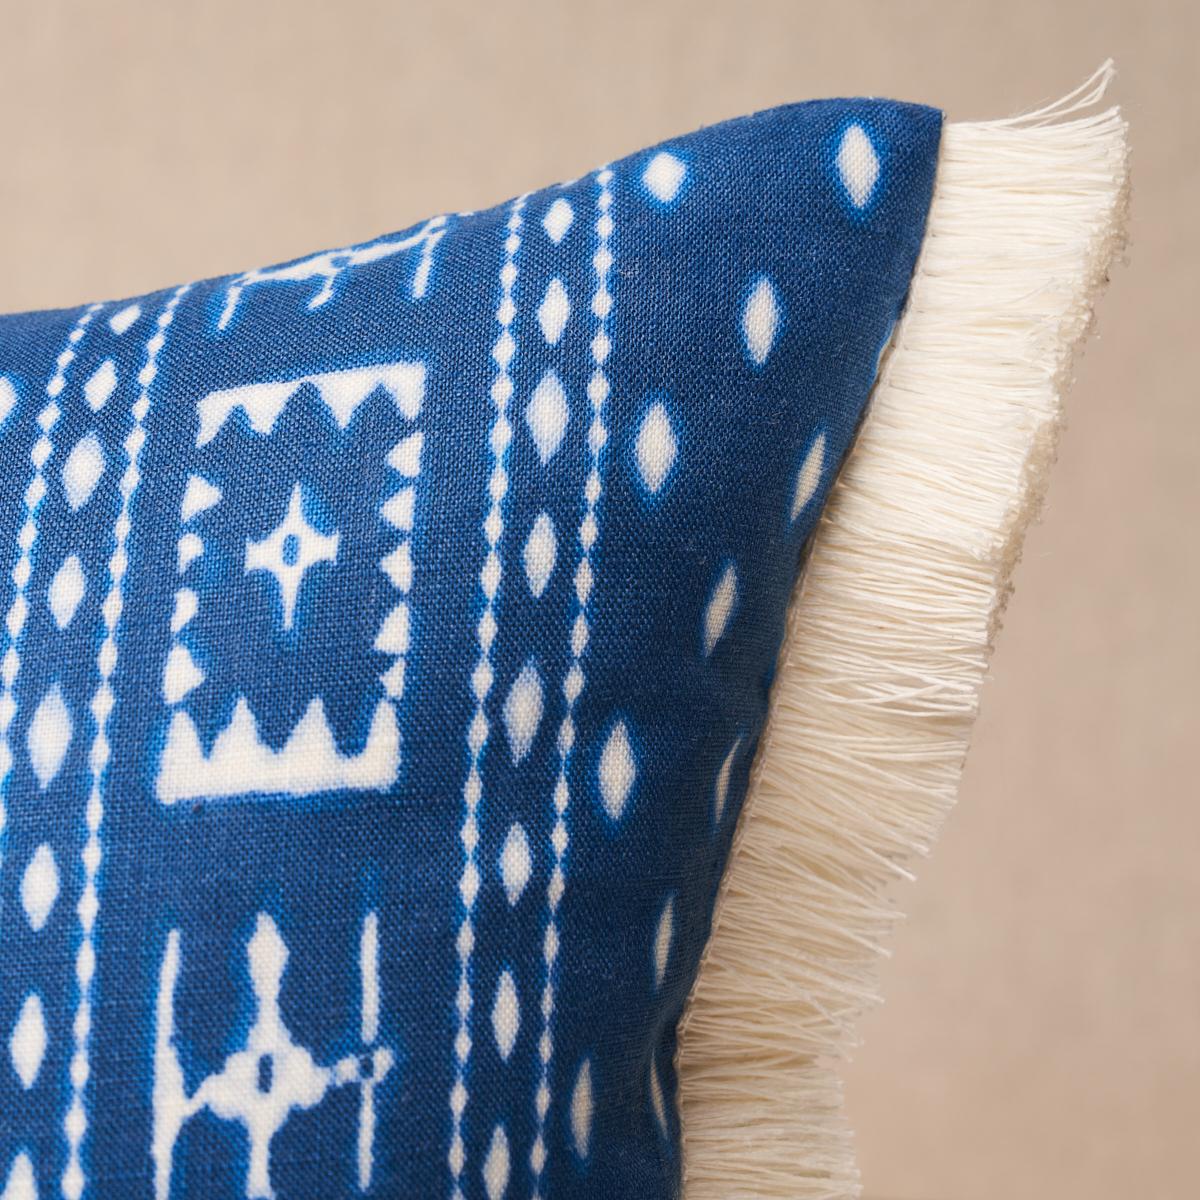 This pillow features Indah Batik with a knife edge finish on top and bottom. Inspired by traditional Indonesian resist-dye techniques, Indah Batik in indigo is a wonderfully versatile small-scale design that plays well with other patterns. Sides of